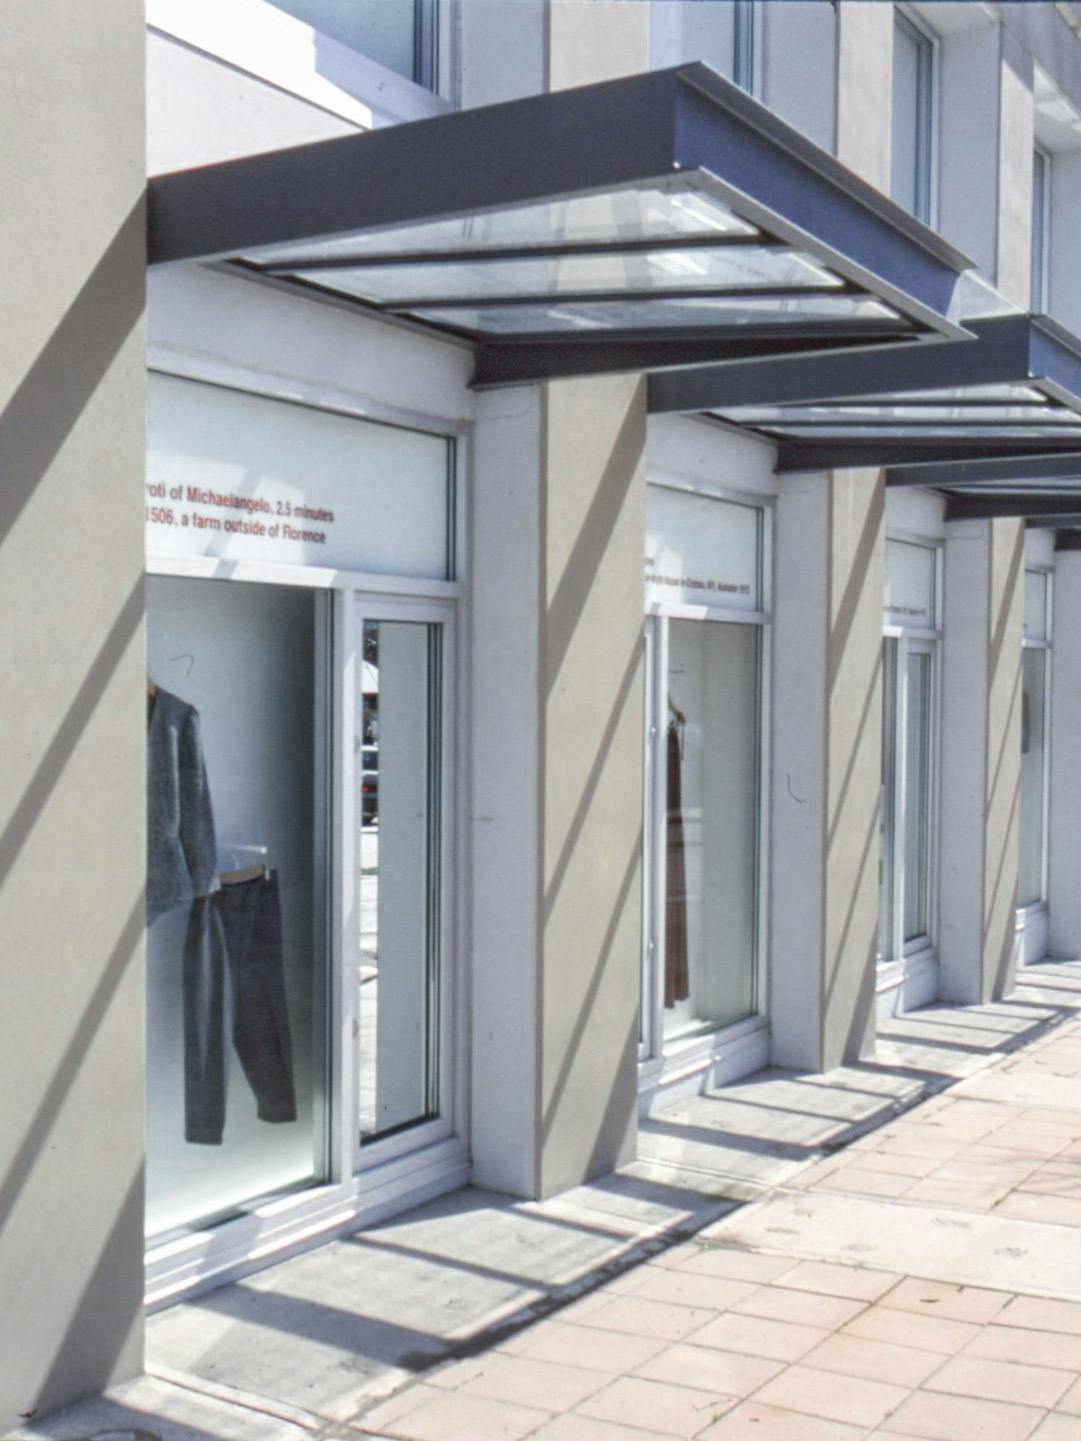 Various outfits are displayed in CAG’s window spaces. The window which is closest to the camera displays a pair of grey sweatpants and a sweatshirt. 